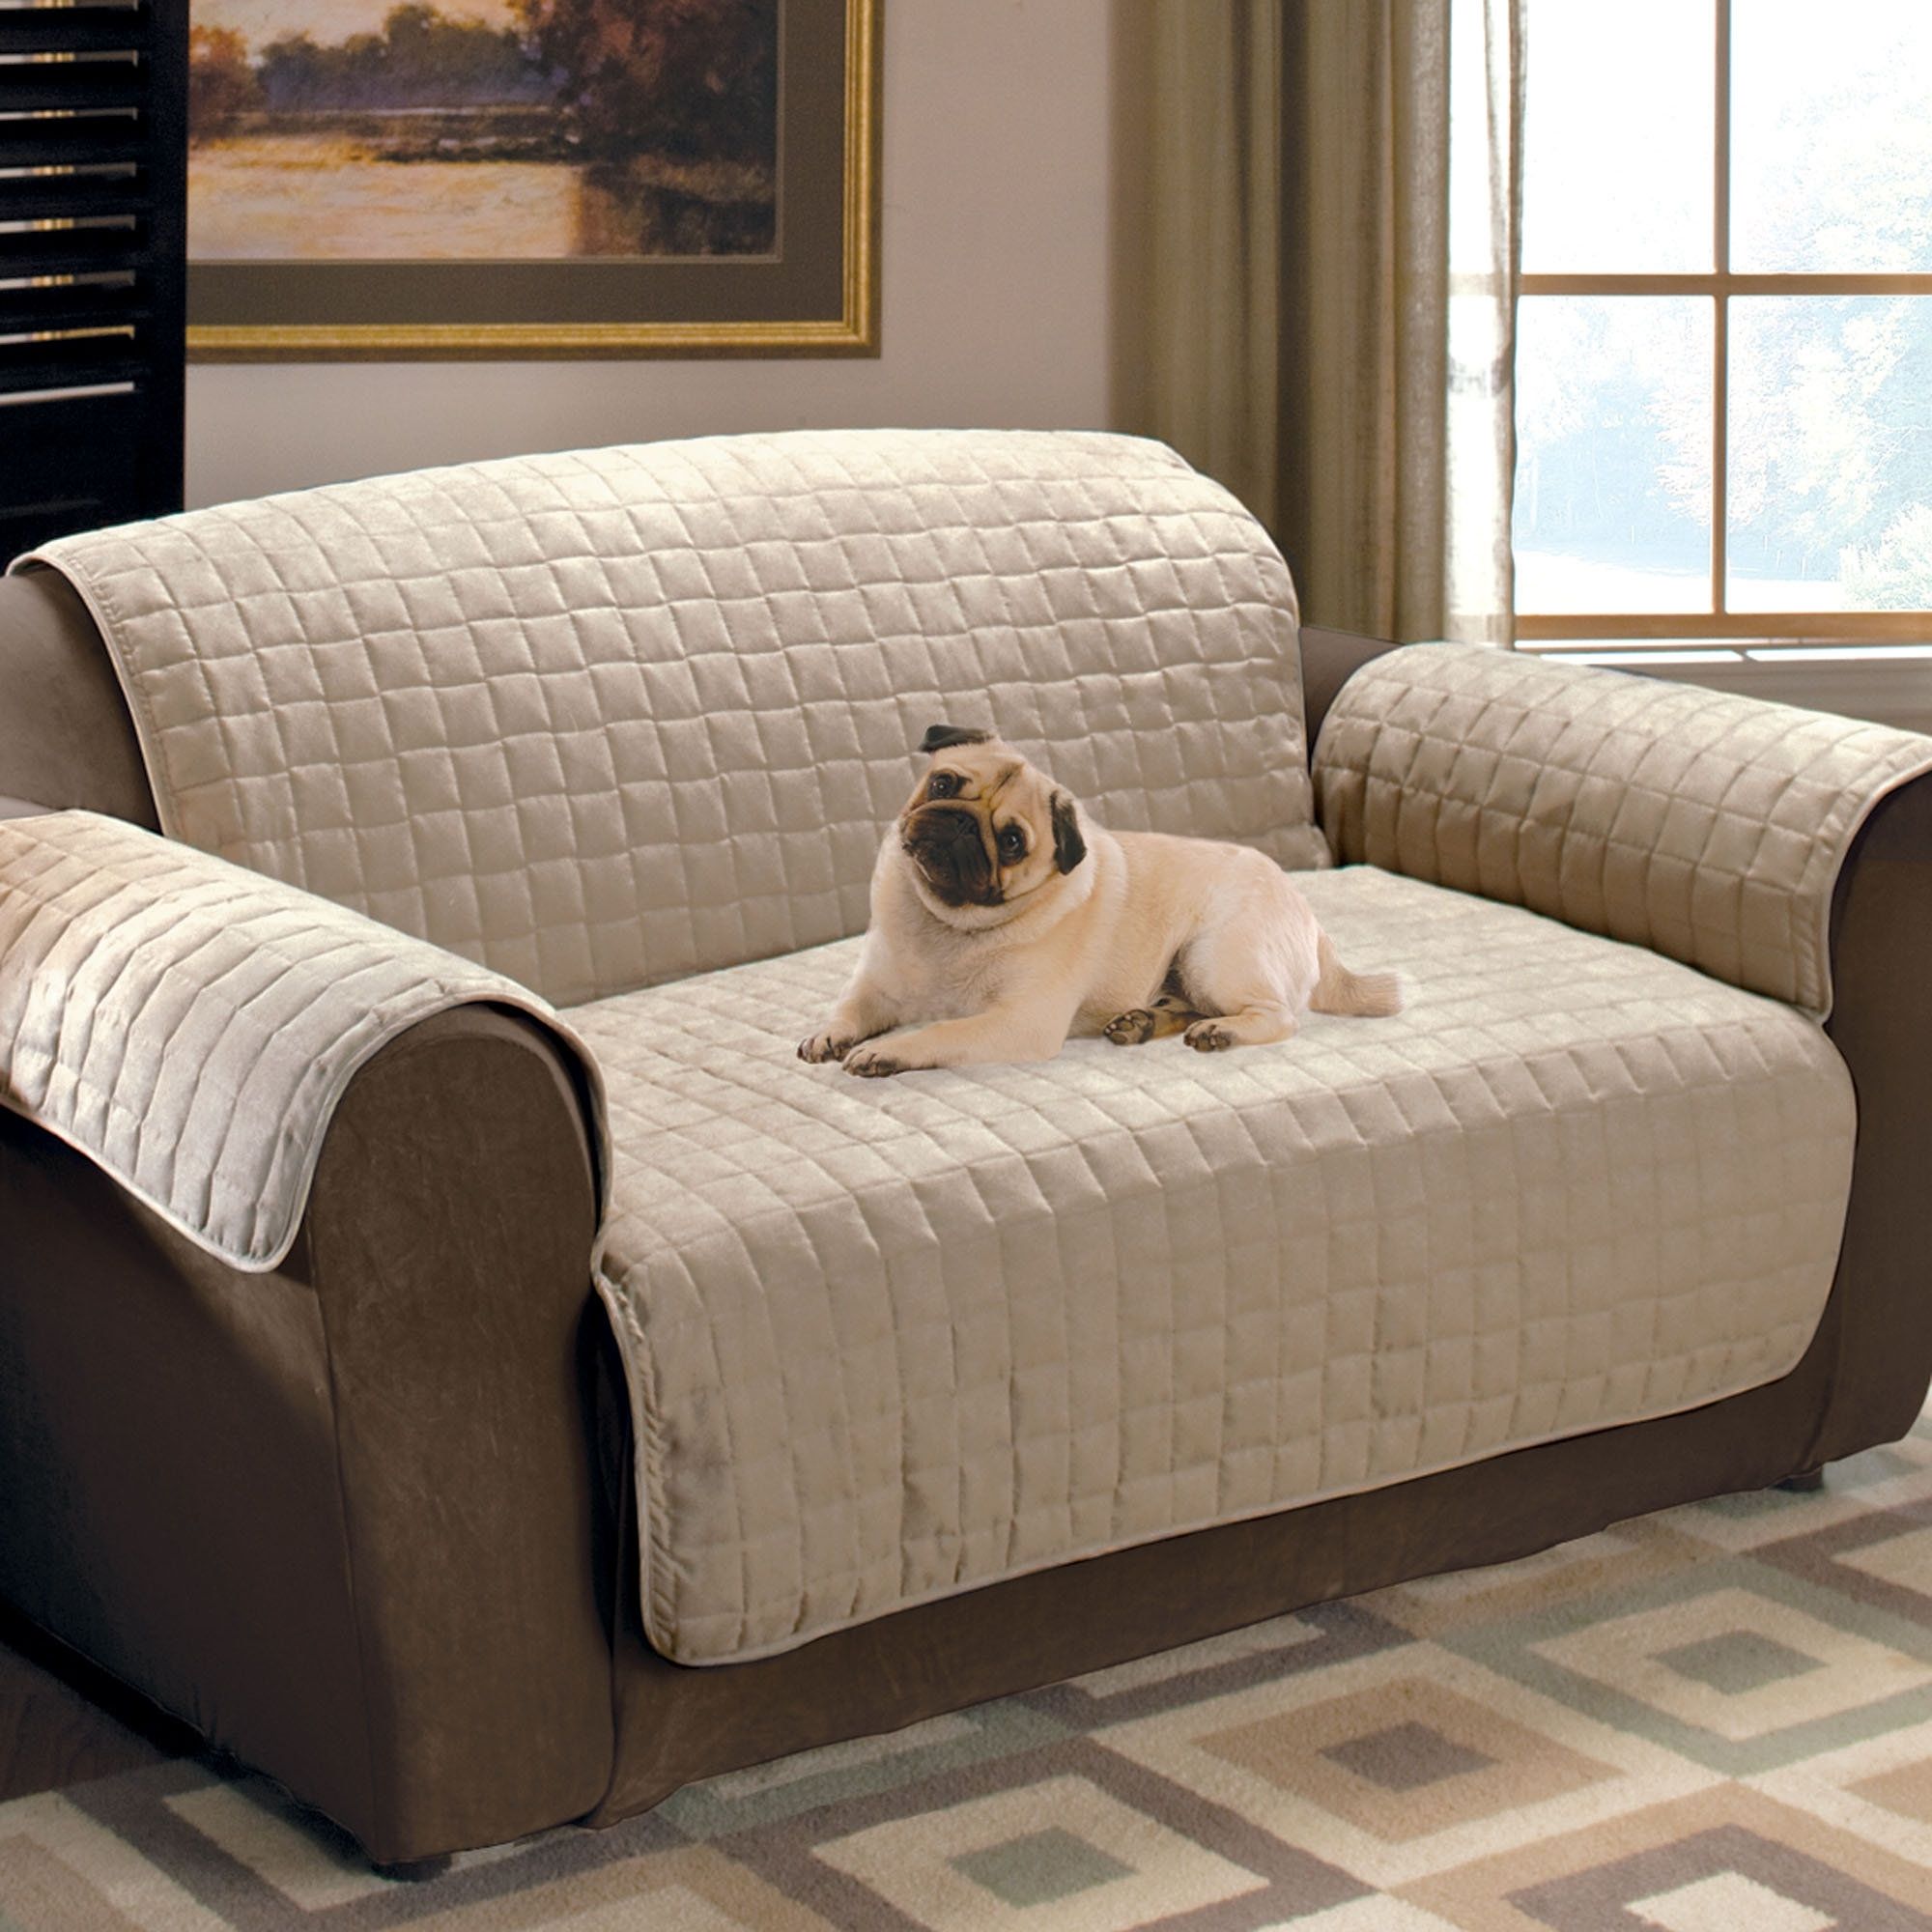 Sofa Slipcover : Sofas With Removable Covers 3 Piece Suite Covers For Removable Covers Sectional Sofas (View 7 of 10)